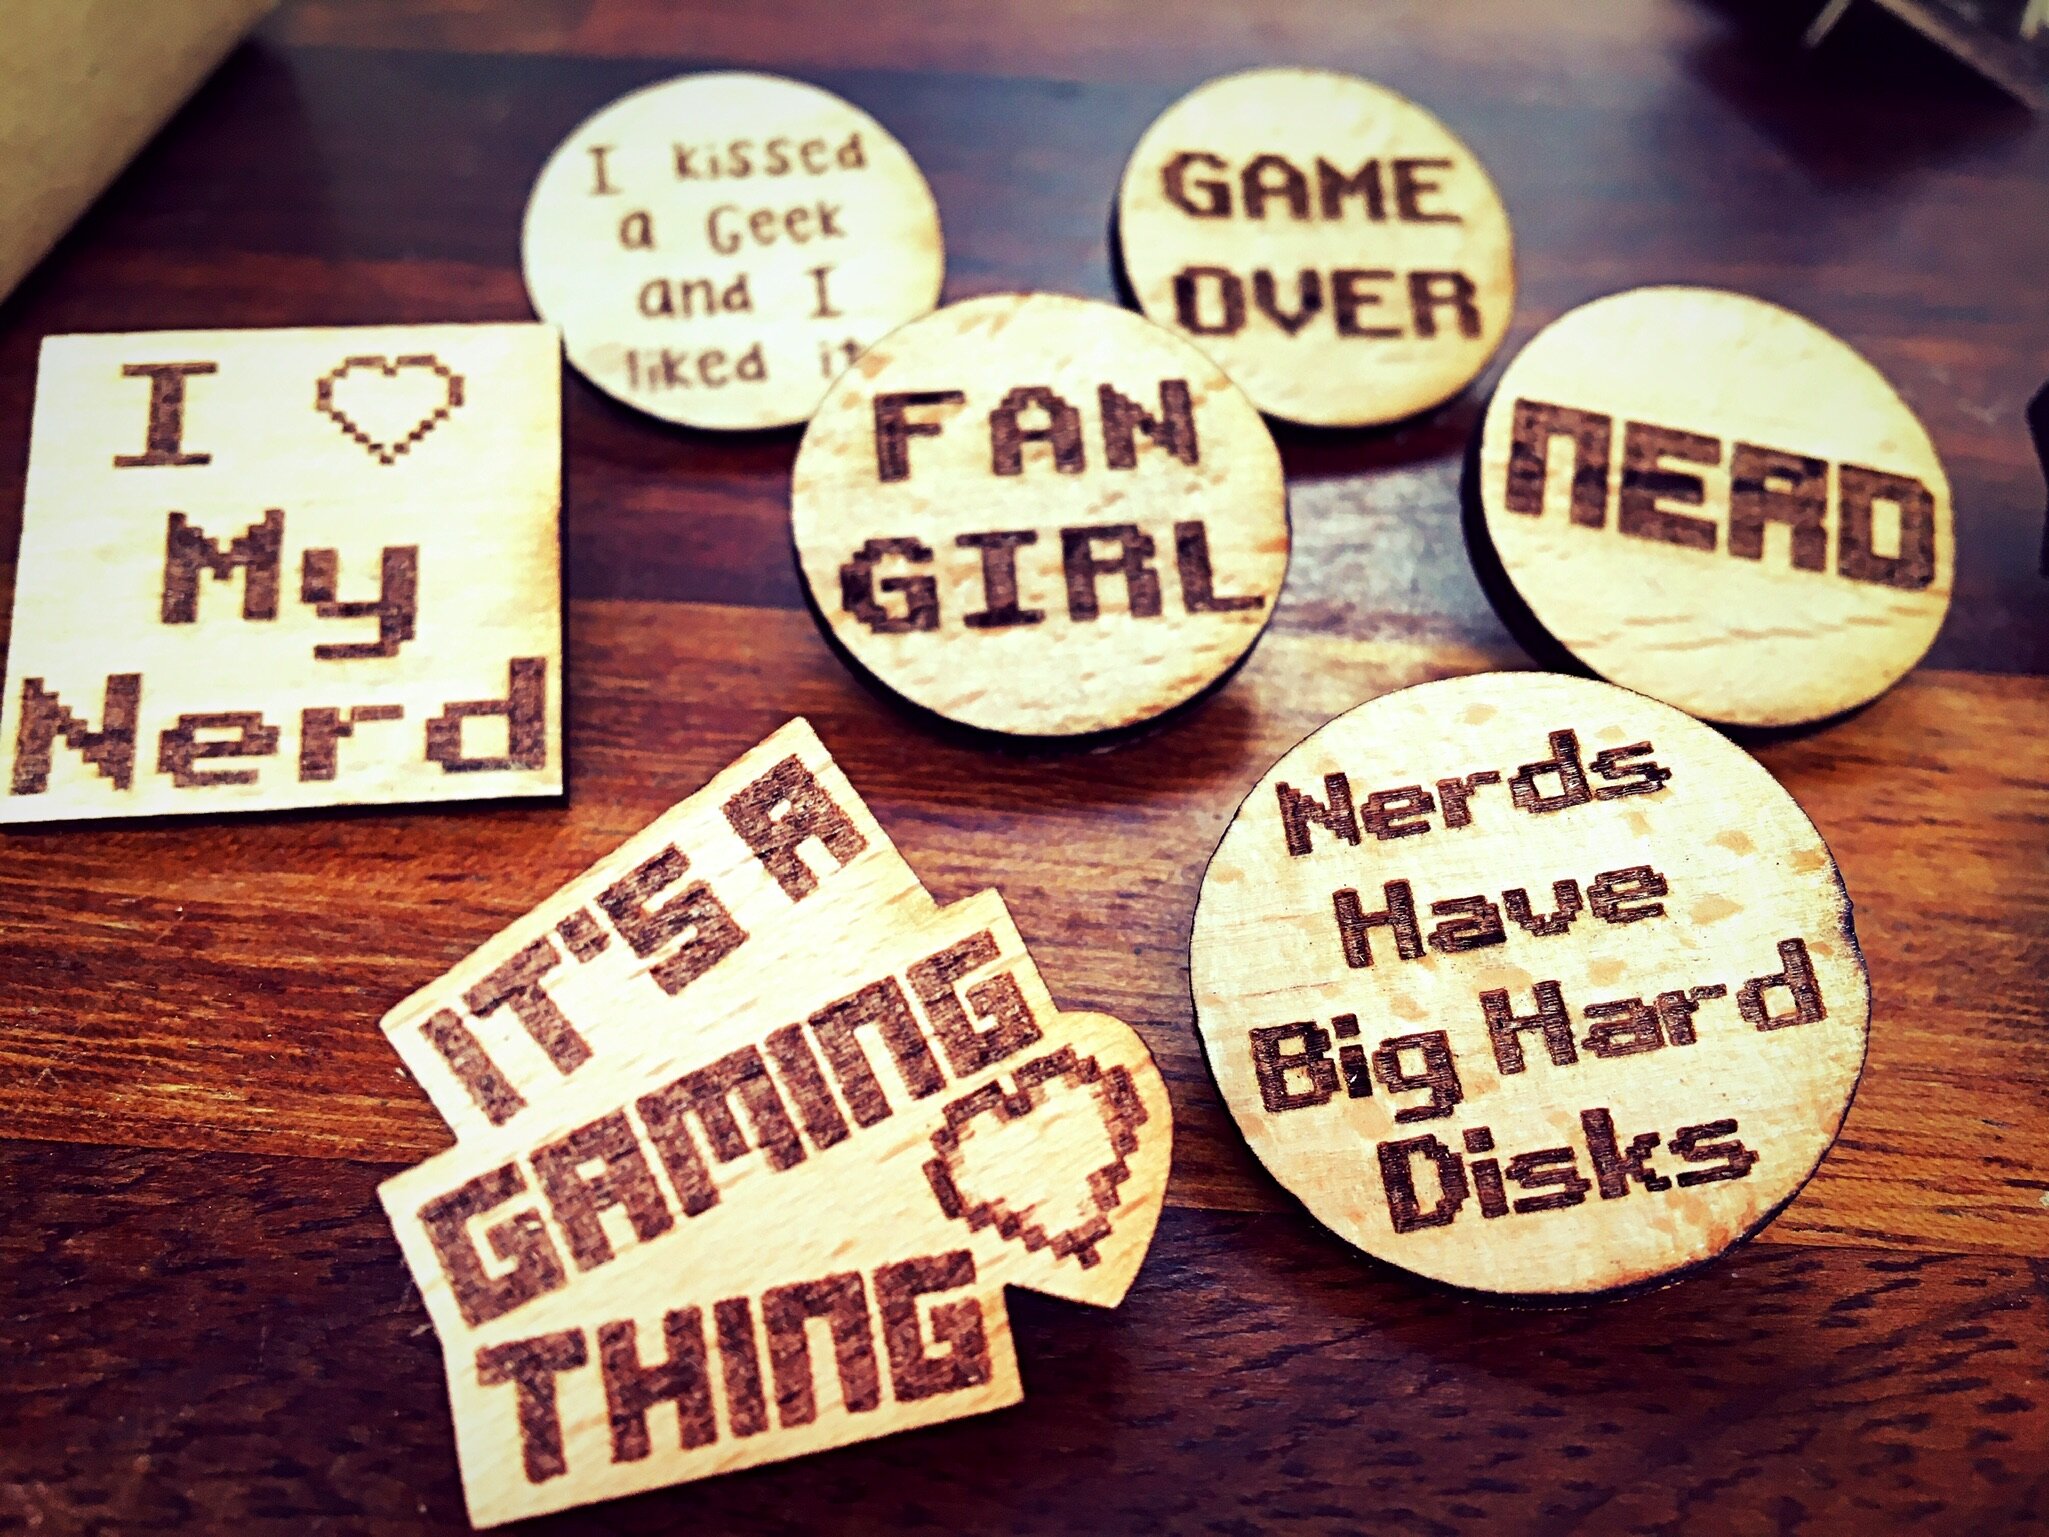  We love nerds solid wood pin badges at Harty’s 